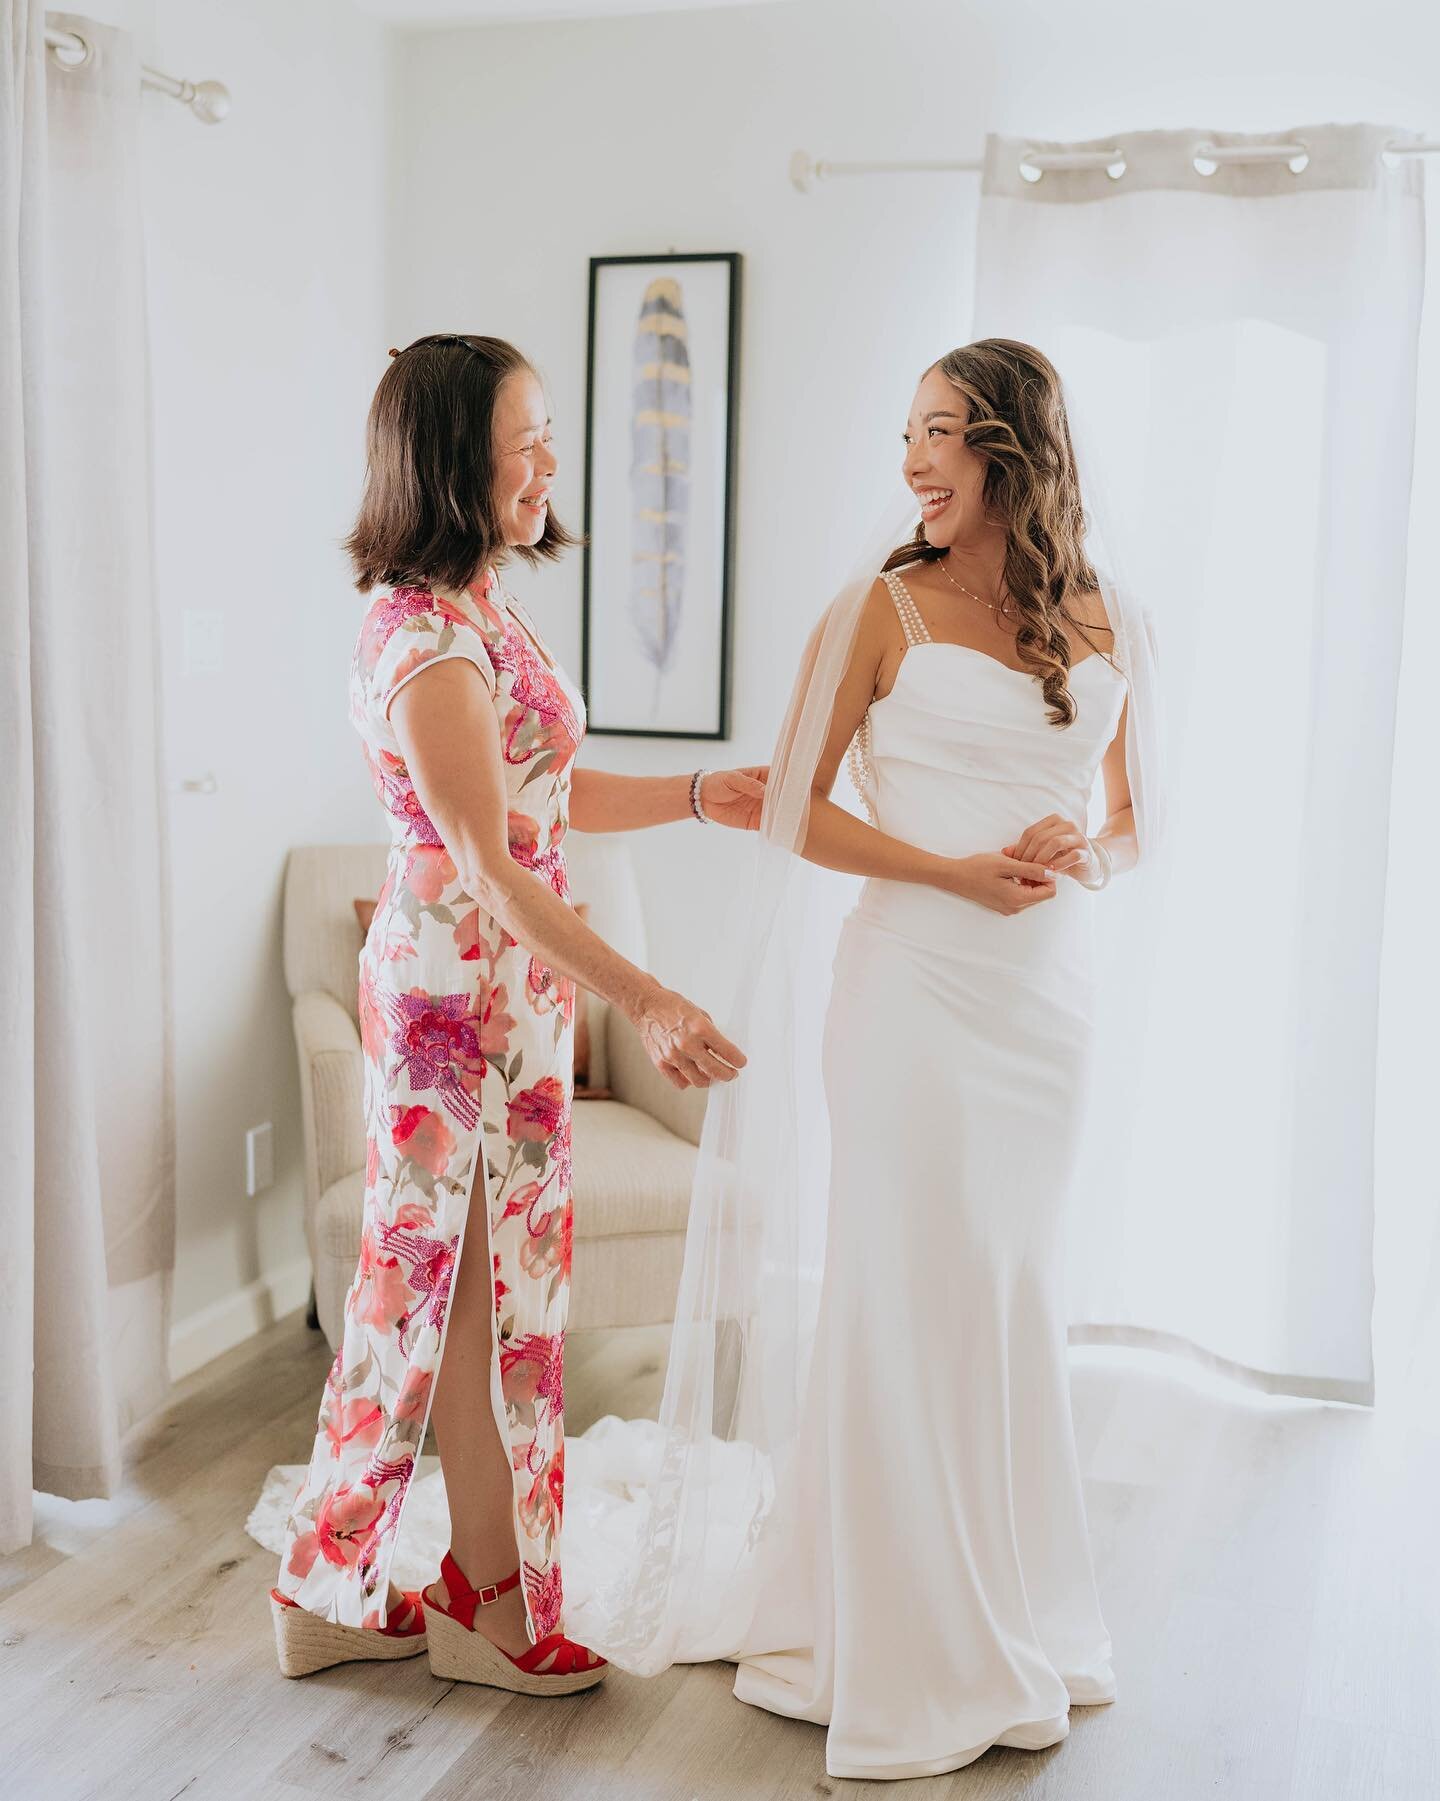 Some of my favorite moments on a wedding day are the first looks, they&rsquo;re just so wholesome! 🥹🫶🏼

#weddingphotographer #weddingphotography #weddingfirstlook #bridalprep #sandiegoweddingphotographer #sandiegoweddingphotography #destinationpho